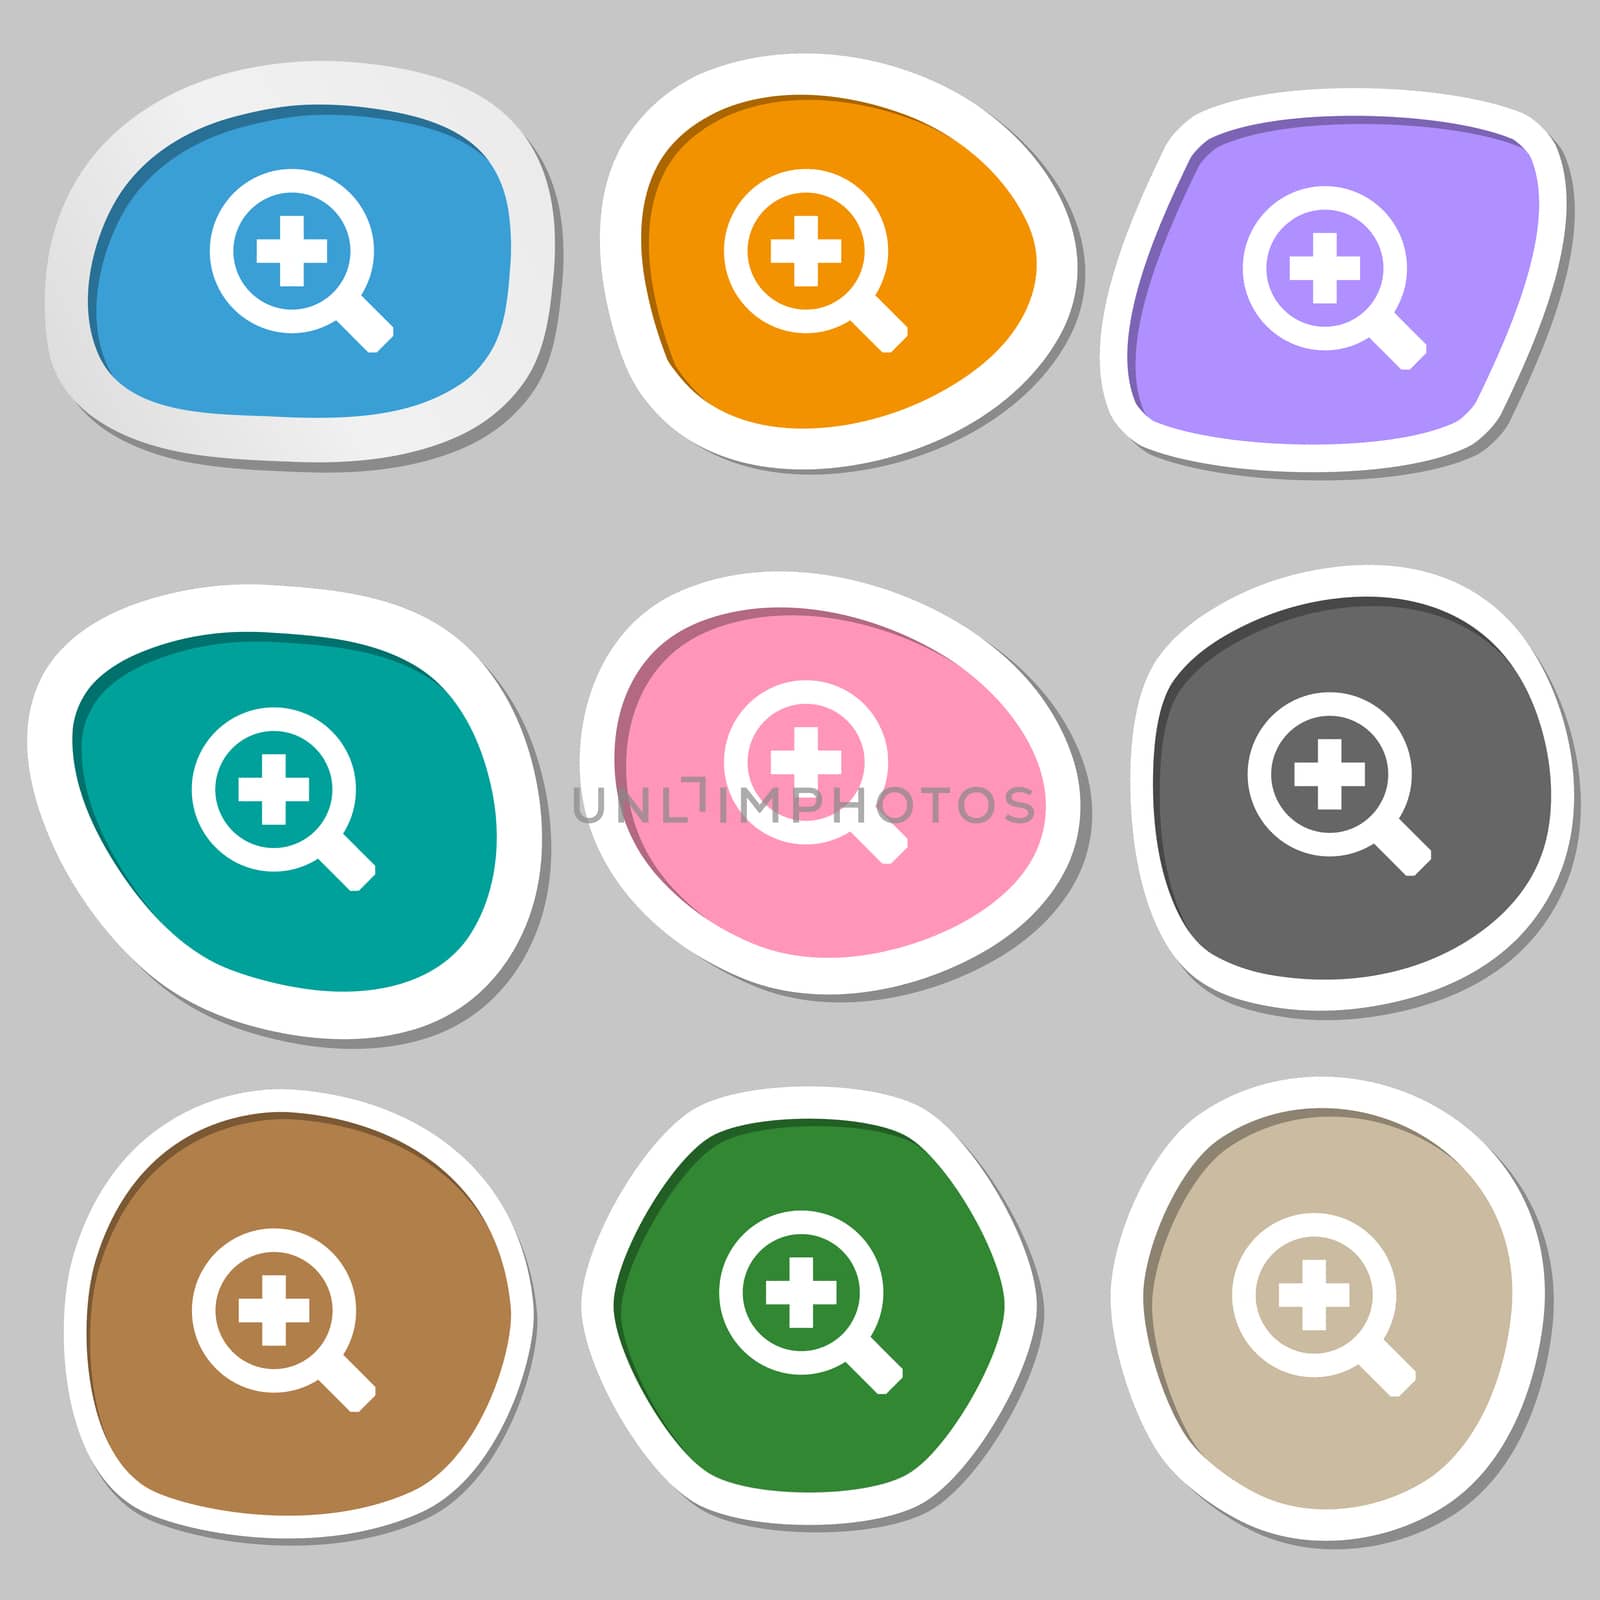 Magnifier glass, Zoom tool icon symbols. Multicolored paper stickers. illustration